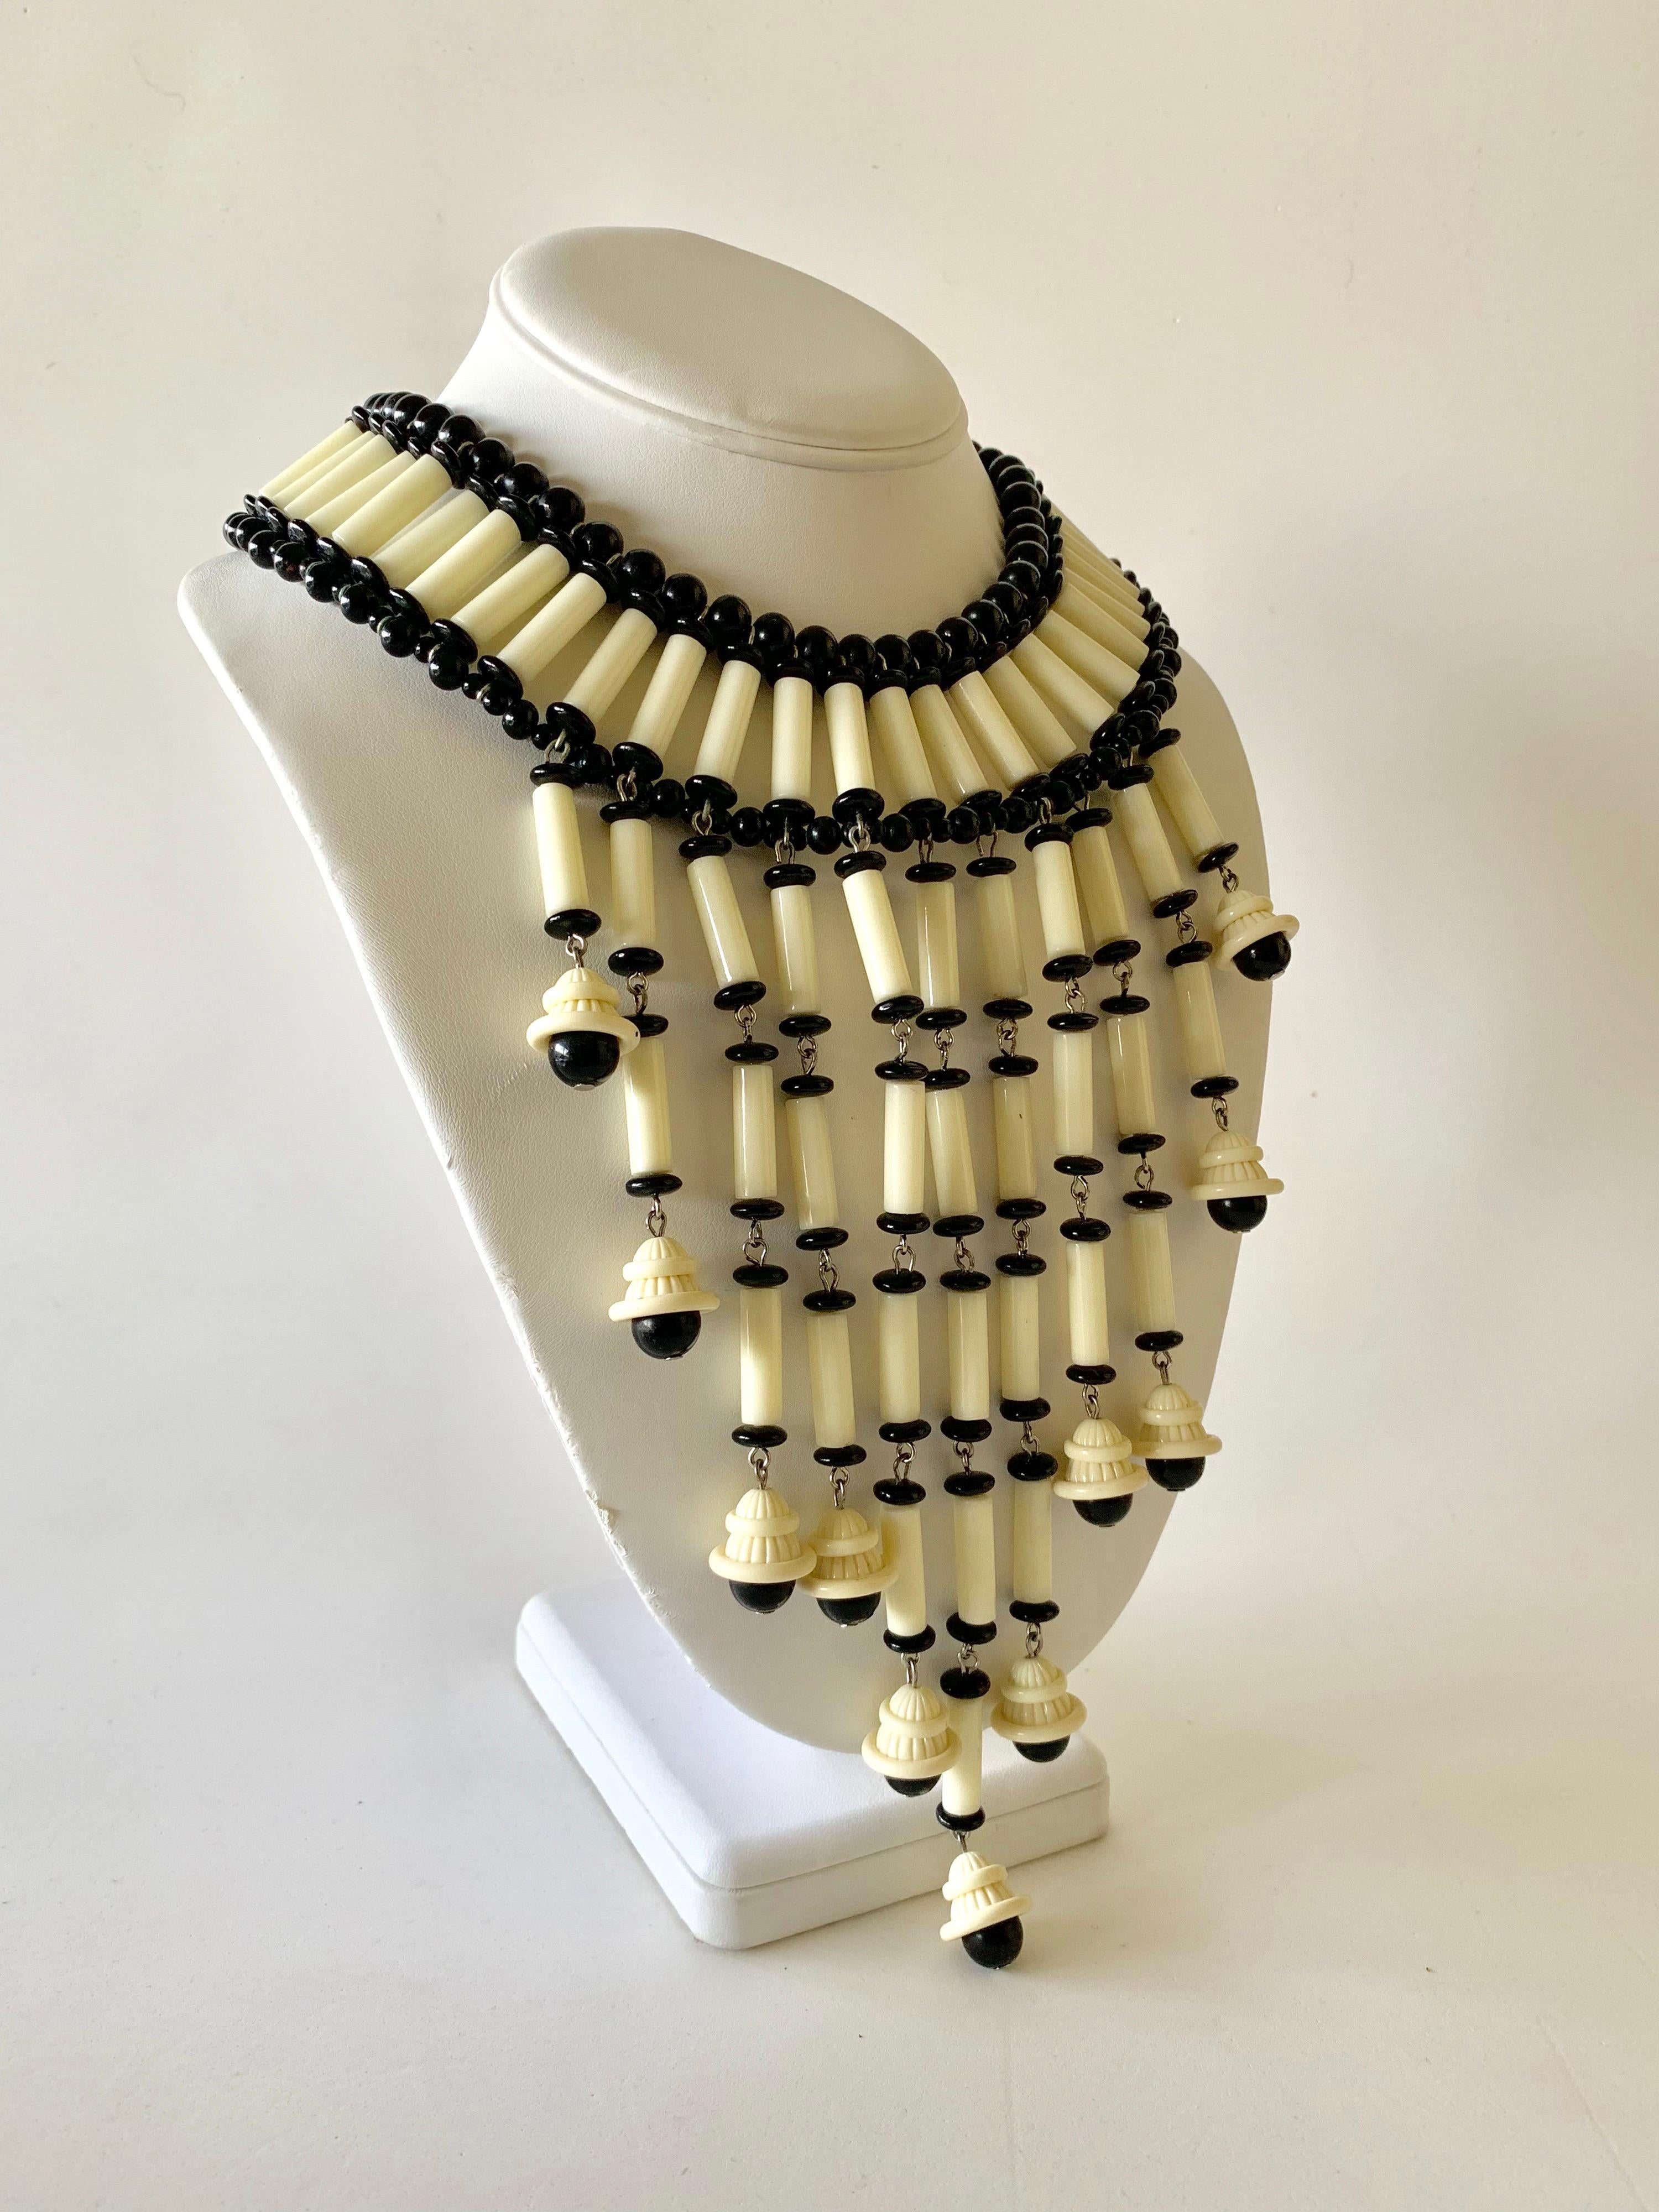 Monumental vintage one of a kindarchitectural black and white beaded fringe “bib” statement necklace - constructed out of black and white antique German glass and galalith beads c1971 in New York by Robert F. Clark and William de Lillo, a signed